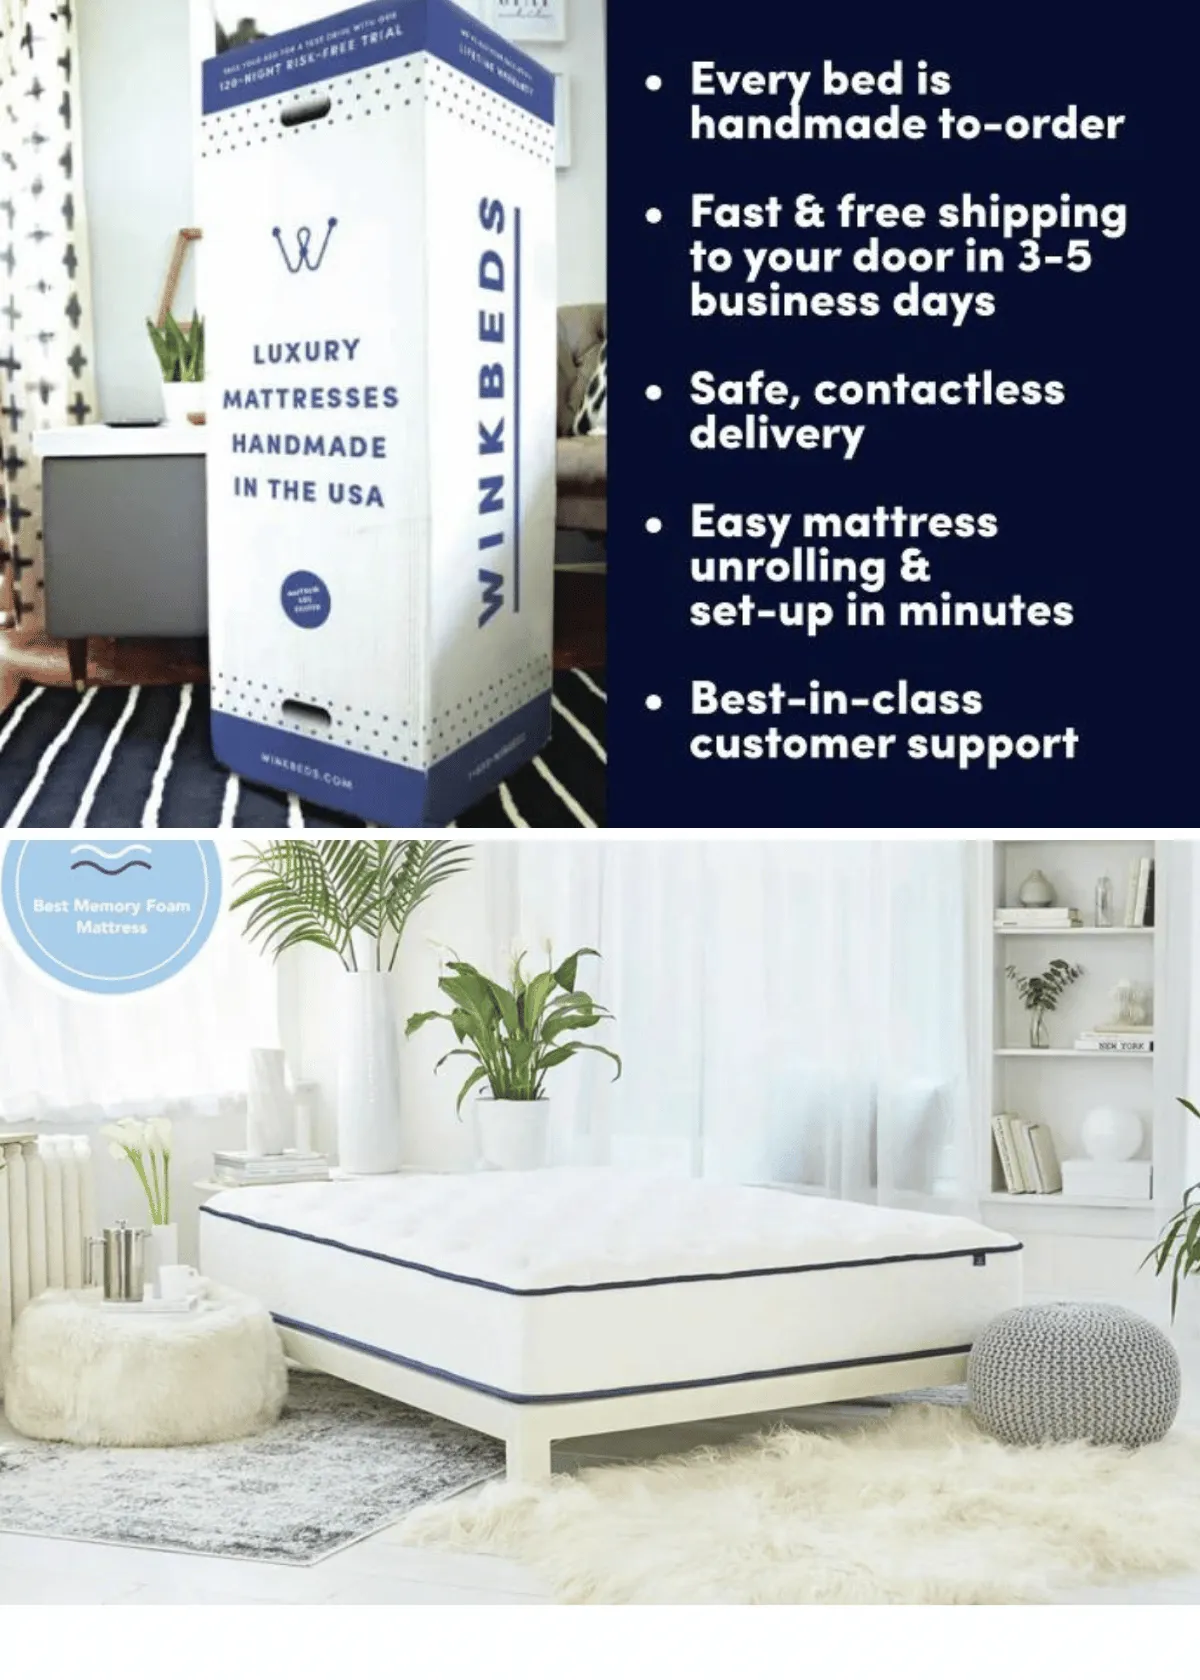 "WinkBed Mattress: Find Your Comfort Match - 4 Options Compared"